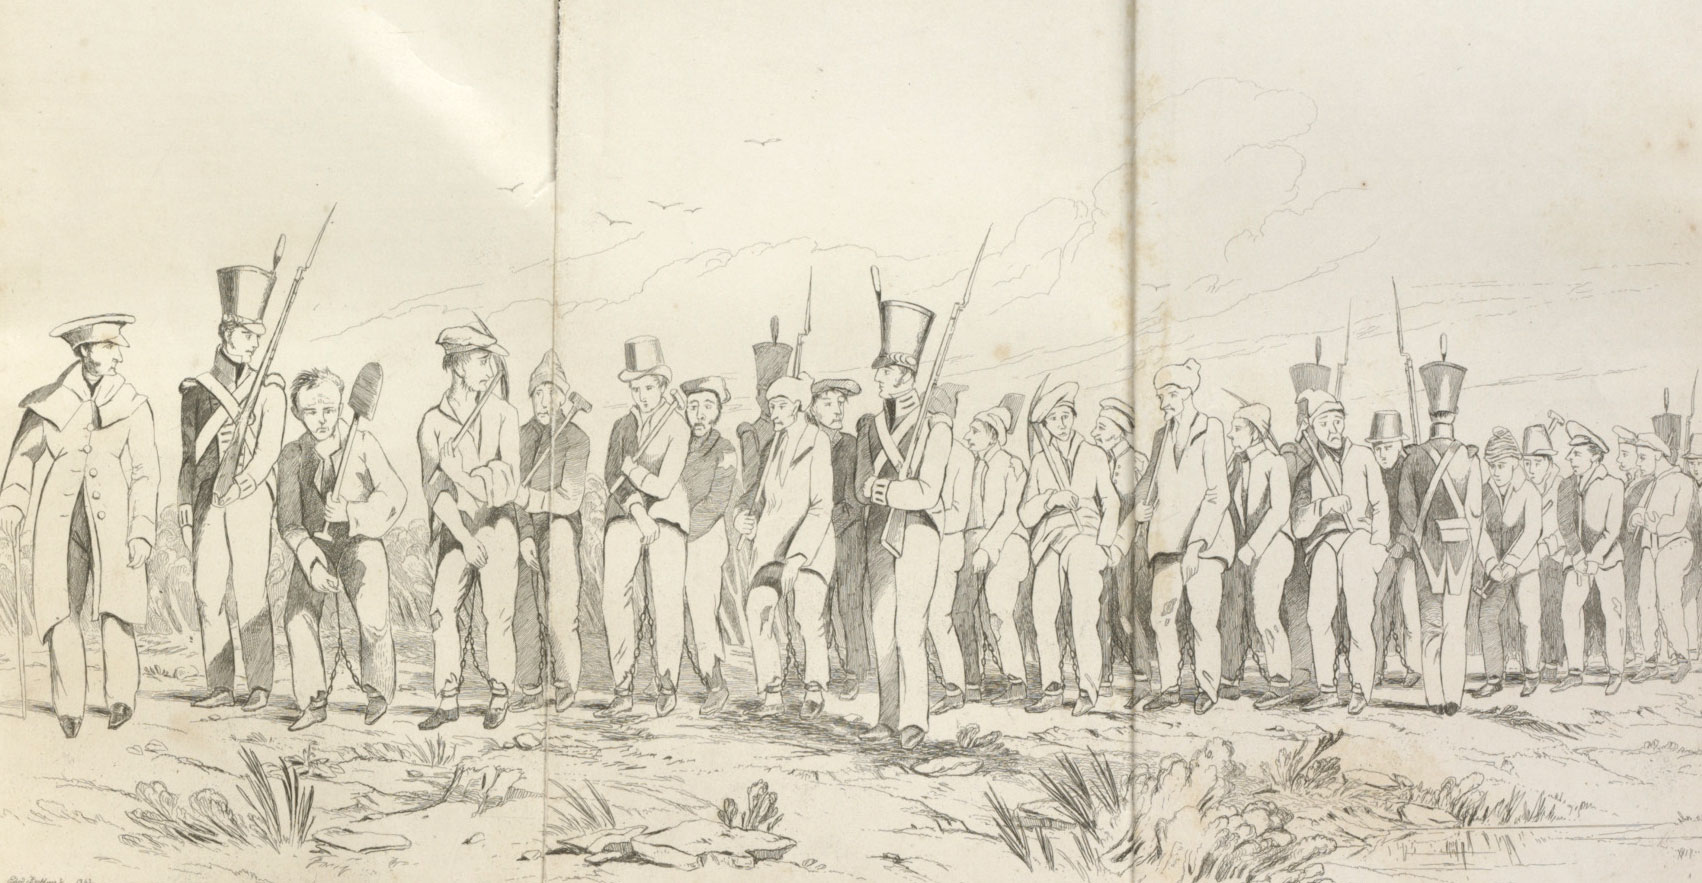 A chain gang. Convicts going to work near Sidney [sic], by Edward Backhouse, 1842.